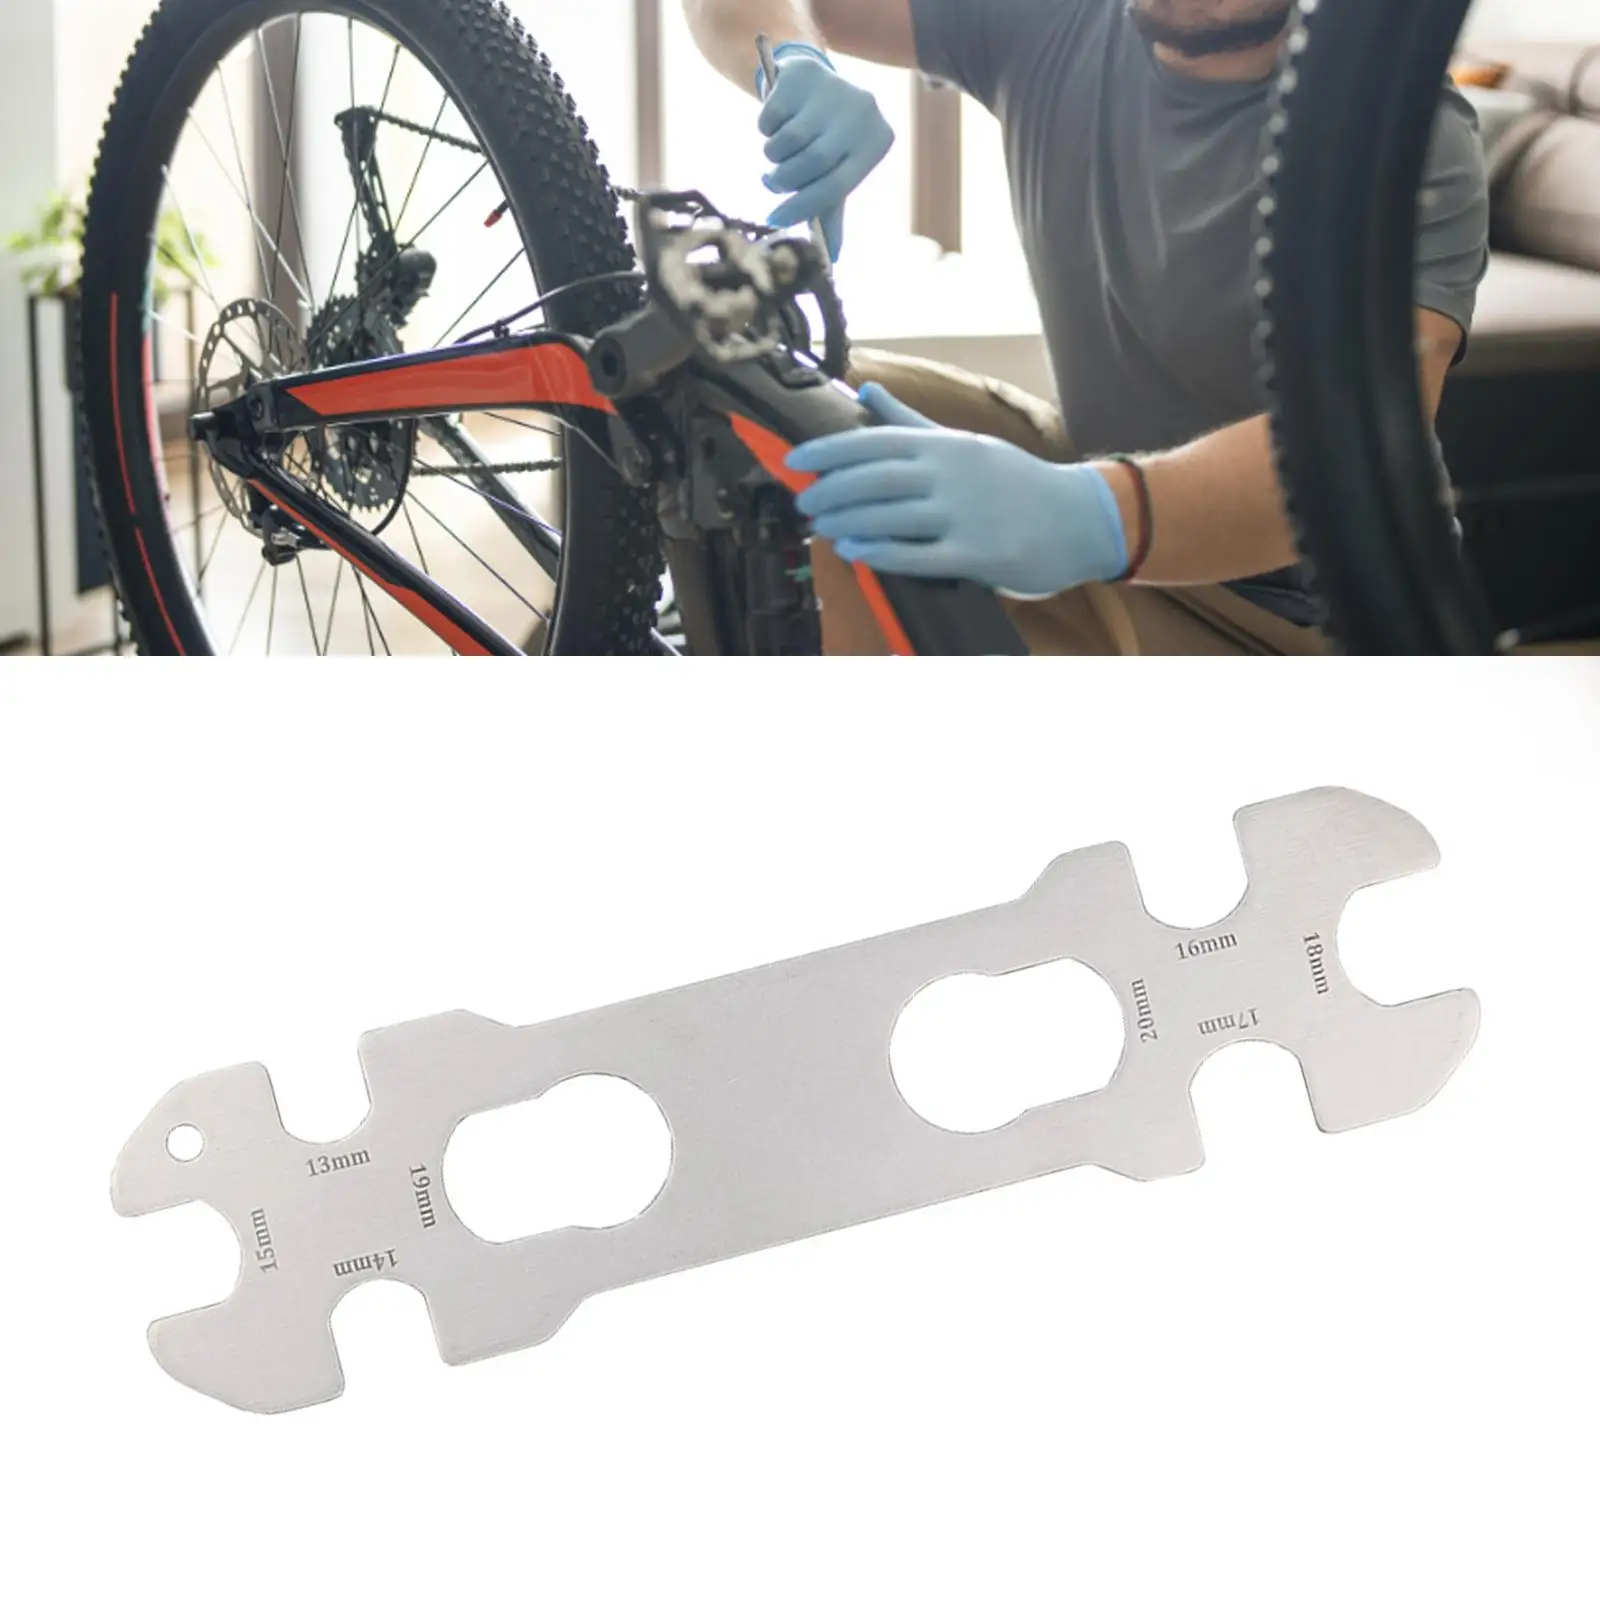 Bike Hub Wrench, Bicycle Cone Hub Wrench 8 Sizes Professional 13-20mm Bicycle Wheel Hub Tool, Cone Wrench for Cycling Tool